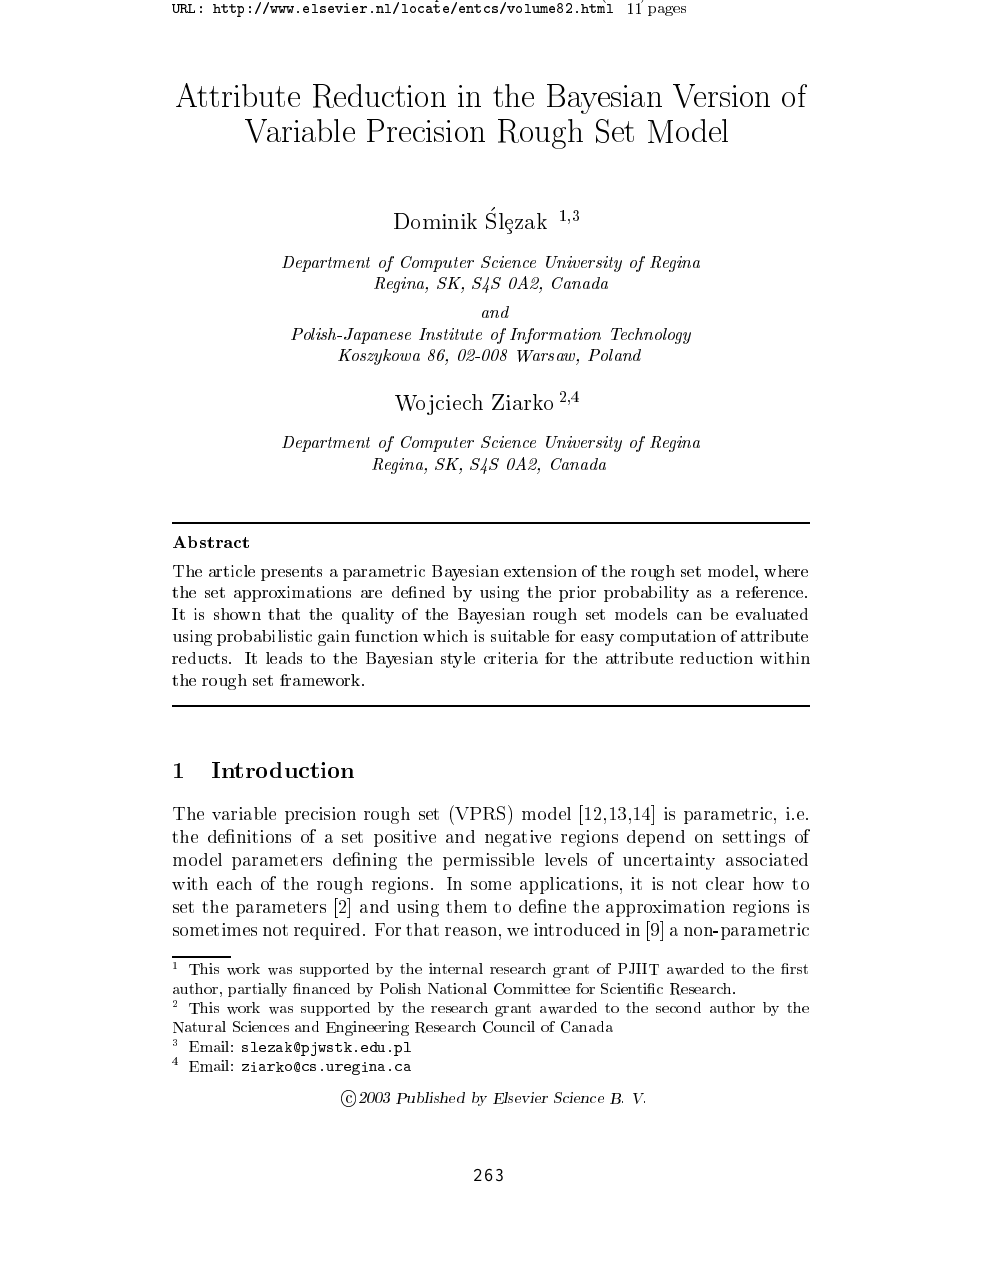 Attribute Reduction In The Bayesian Version Of Variable Precision Rough Set Model Topic Of Research Paper In Computer And Information Sciences Download Scholarly Article Pdf And Read For Free On Cyberleninka